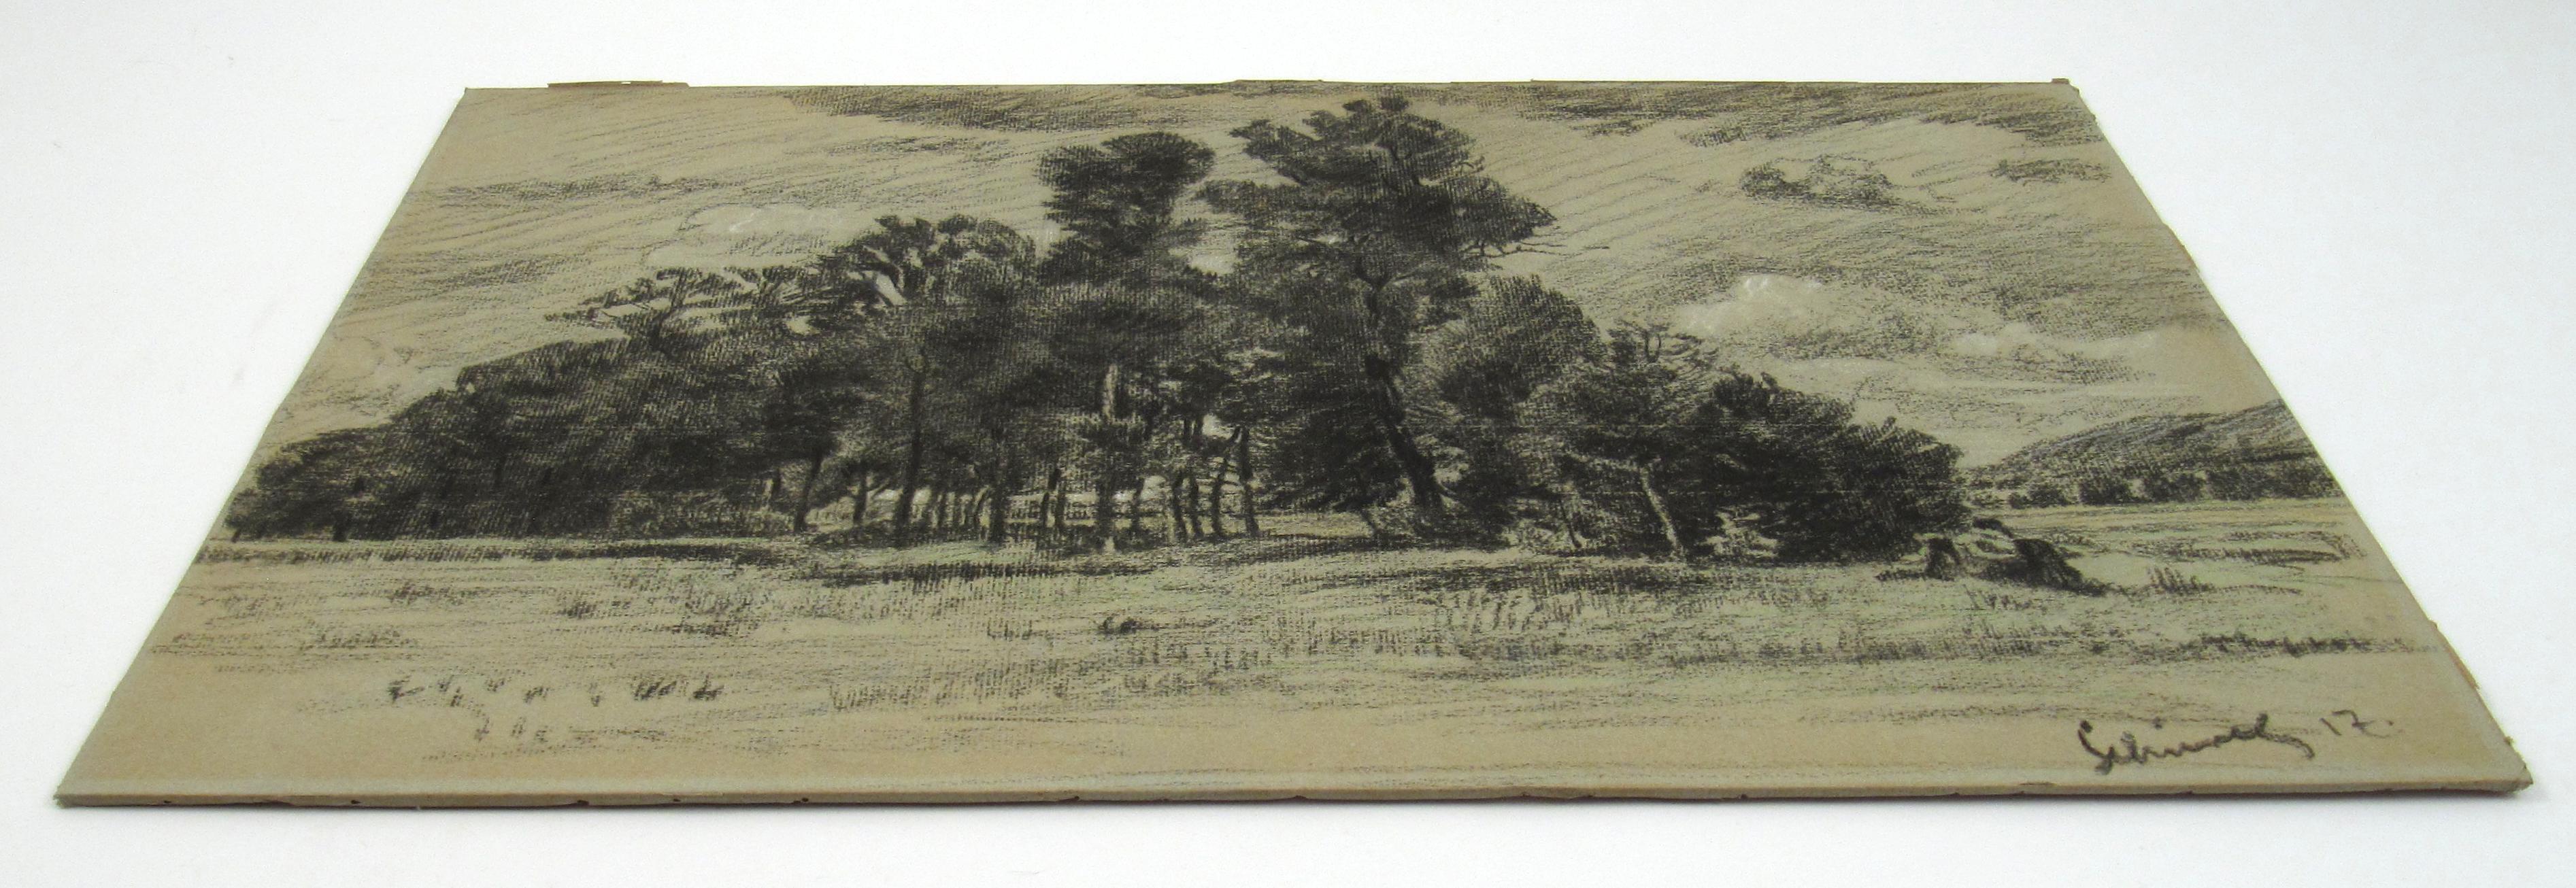 Paul Schürch
(Swiss, ∗ 14.2.1886 Wangen b. Olten, † 11.12.1939 Bern)

Romantic Landscape in area of Solothurn, Switzerland

•	Charcoal/Pencil drawing delicately heightened in various pastel on laid paper mounted on card, ca. 29 x 45.5 cm
•	Signed